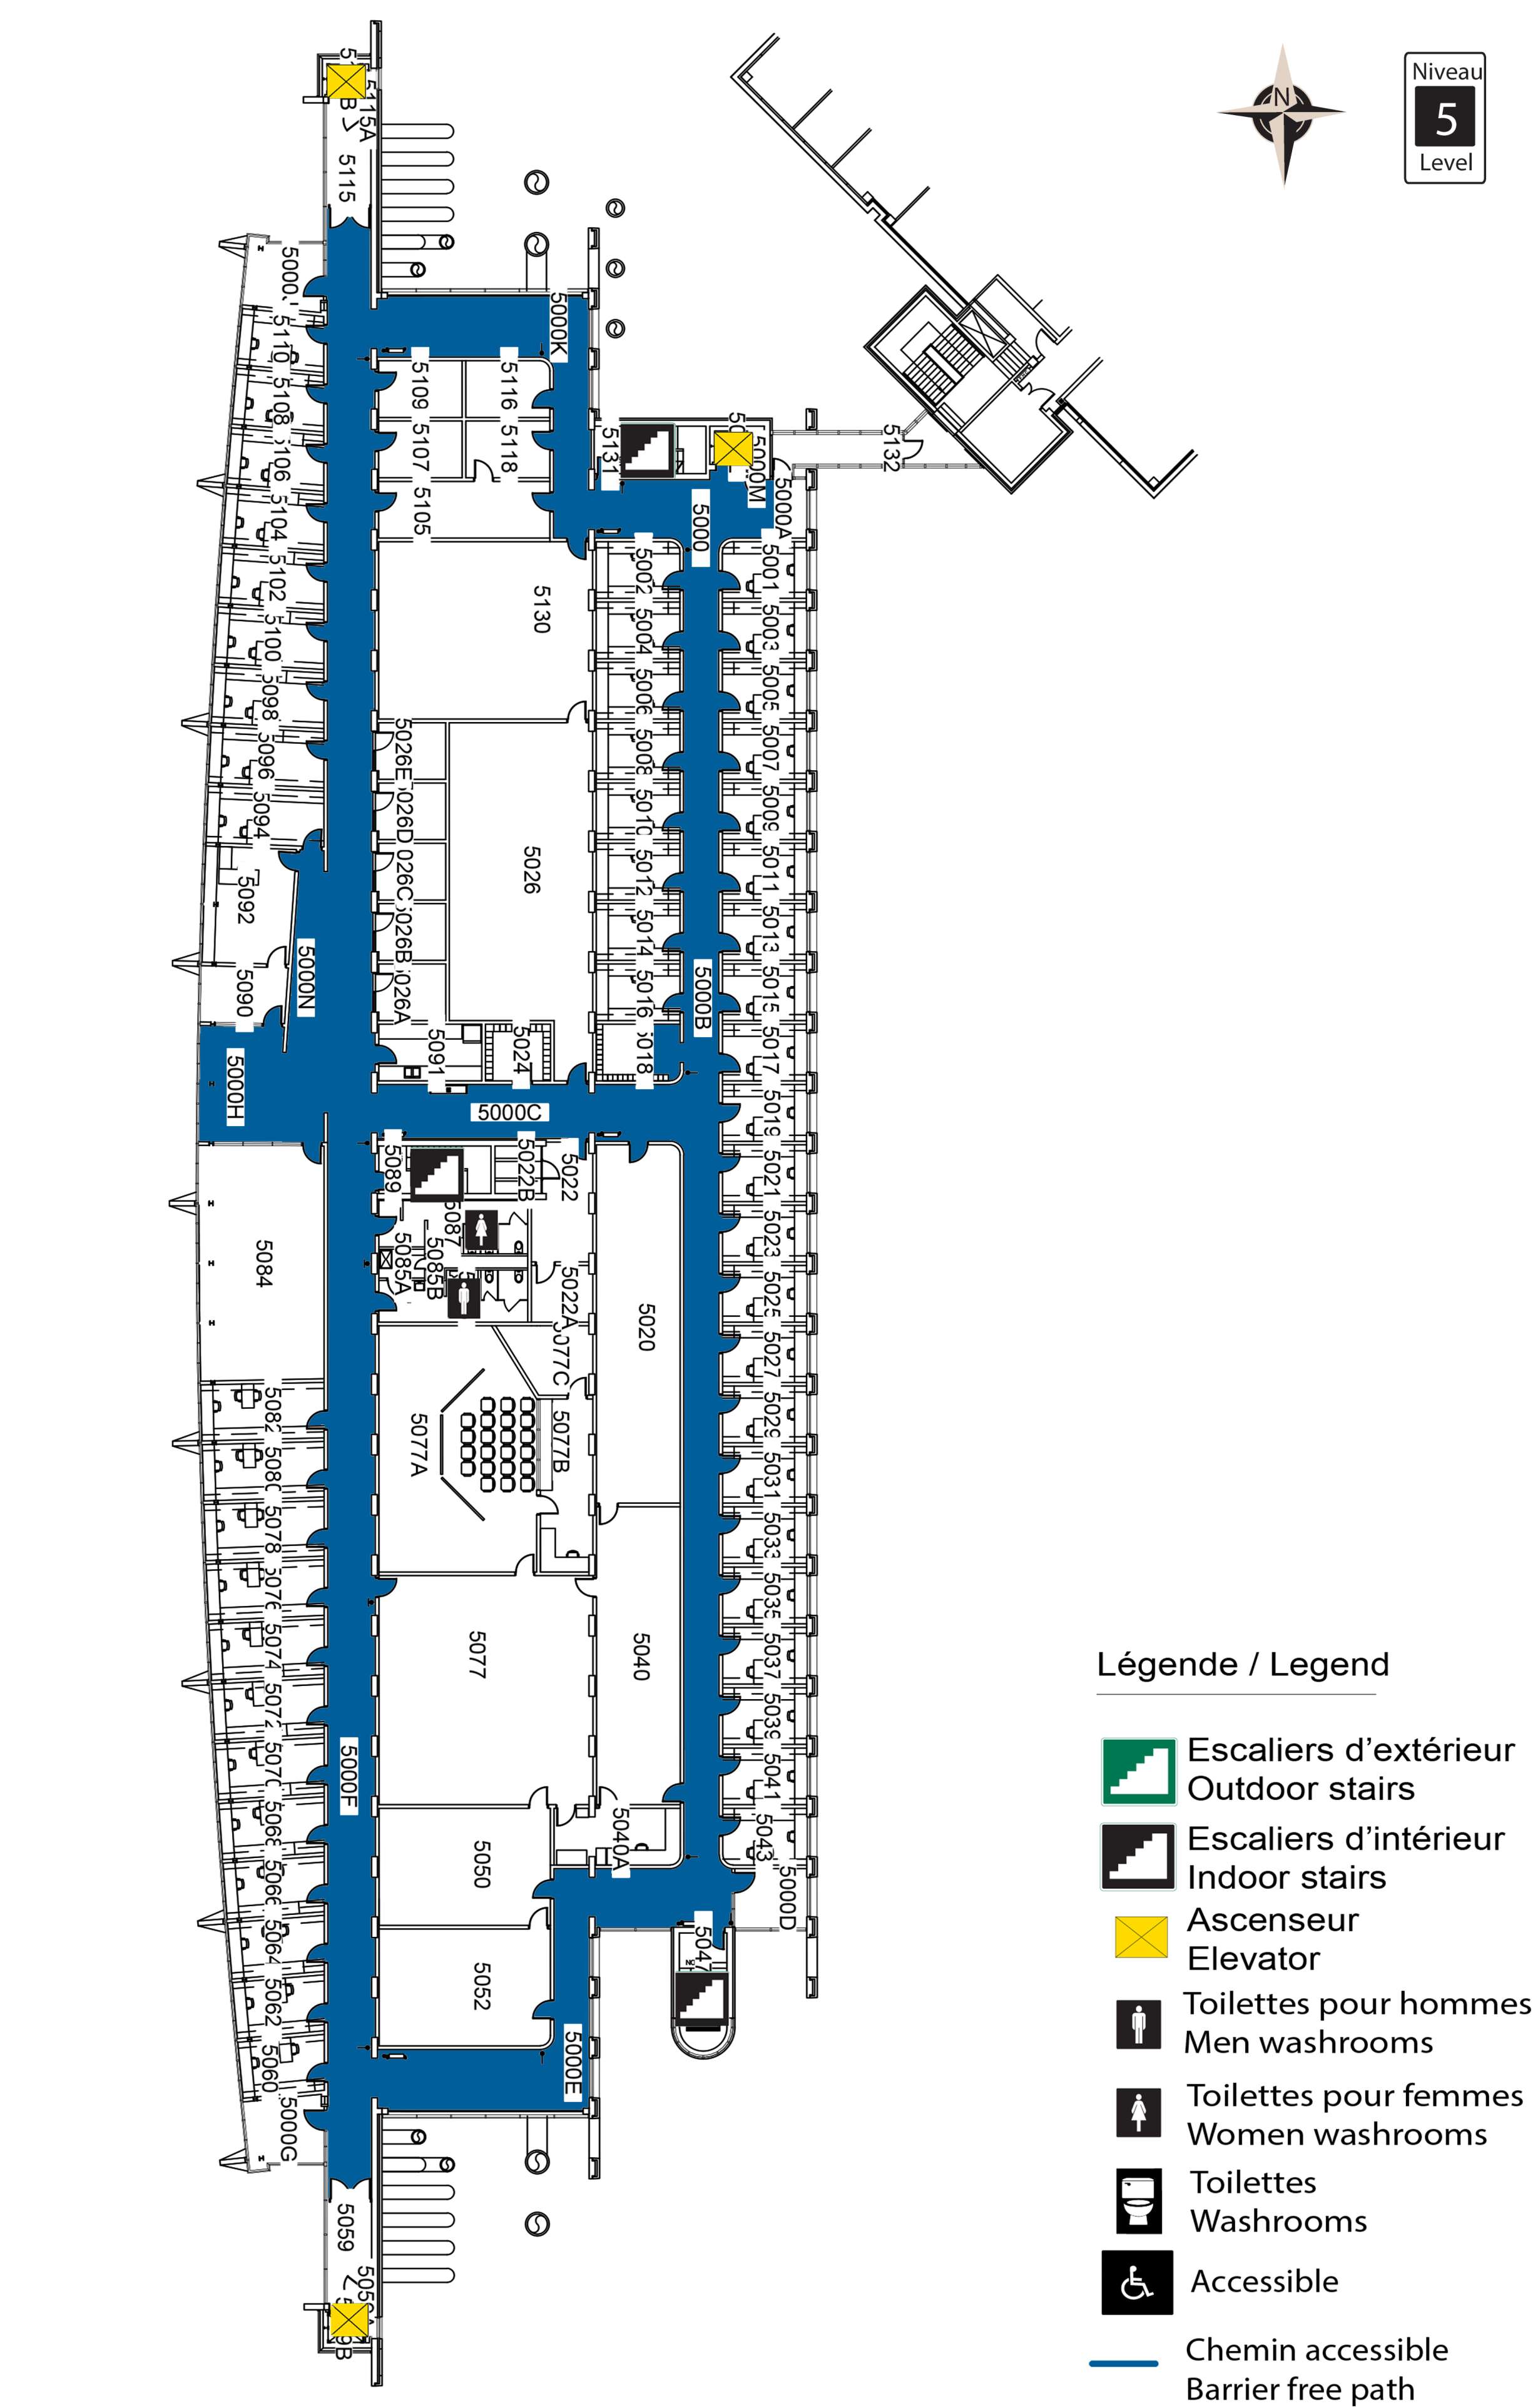 Accessible map of STE level 5